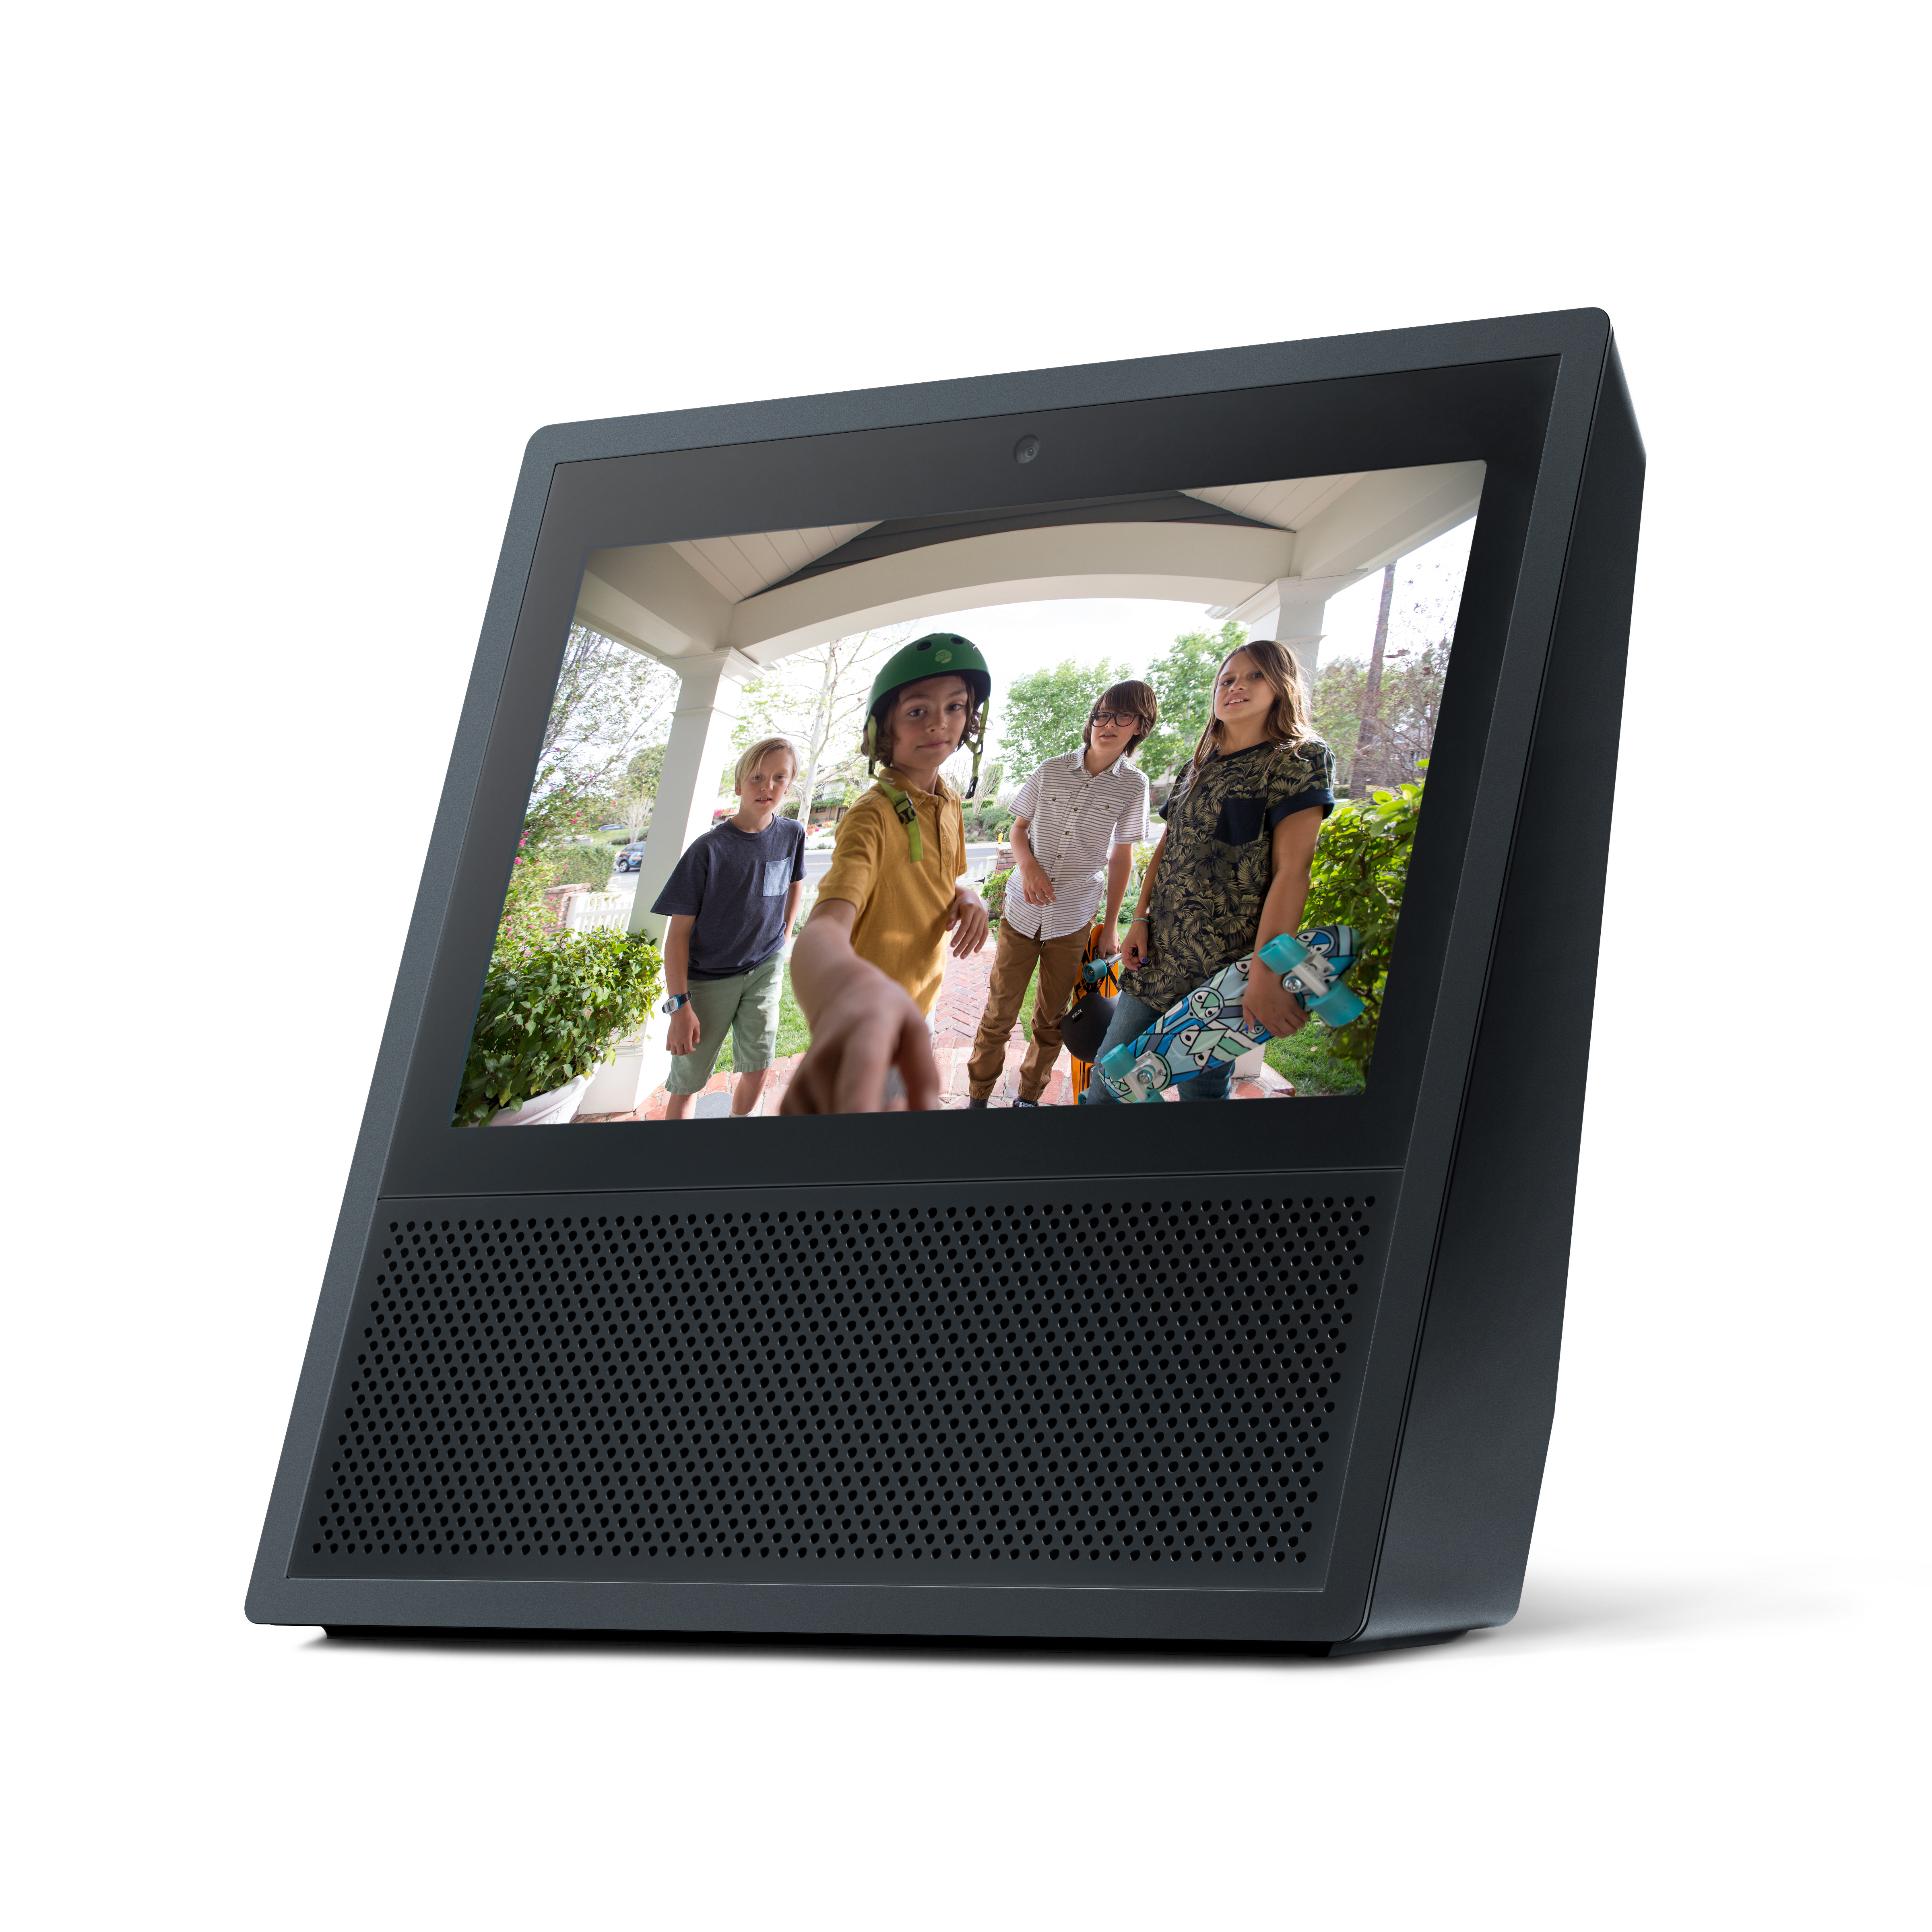 Vivint Smart Home Integrates with Amazon Echo Show to Extend Leadership